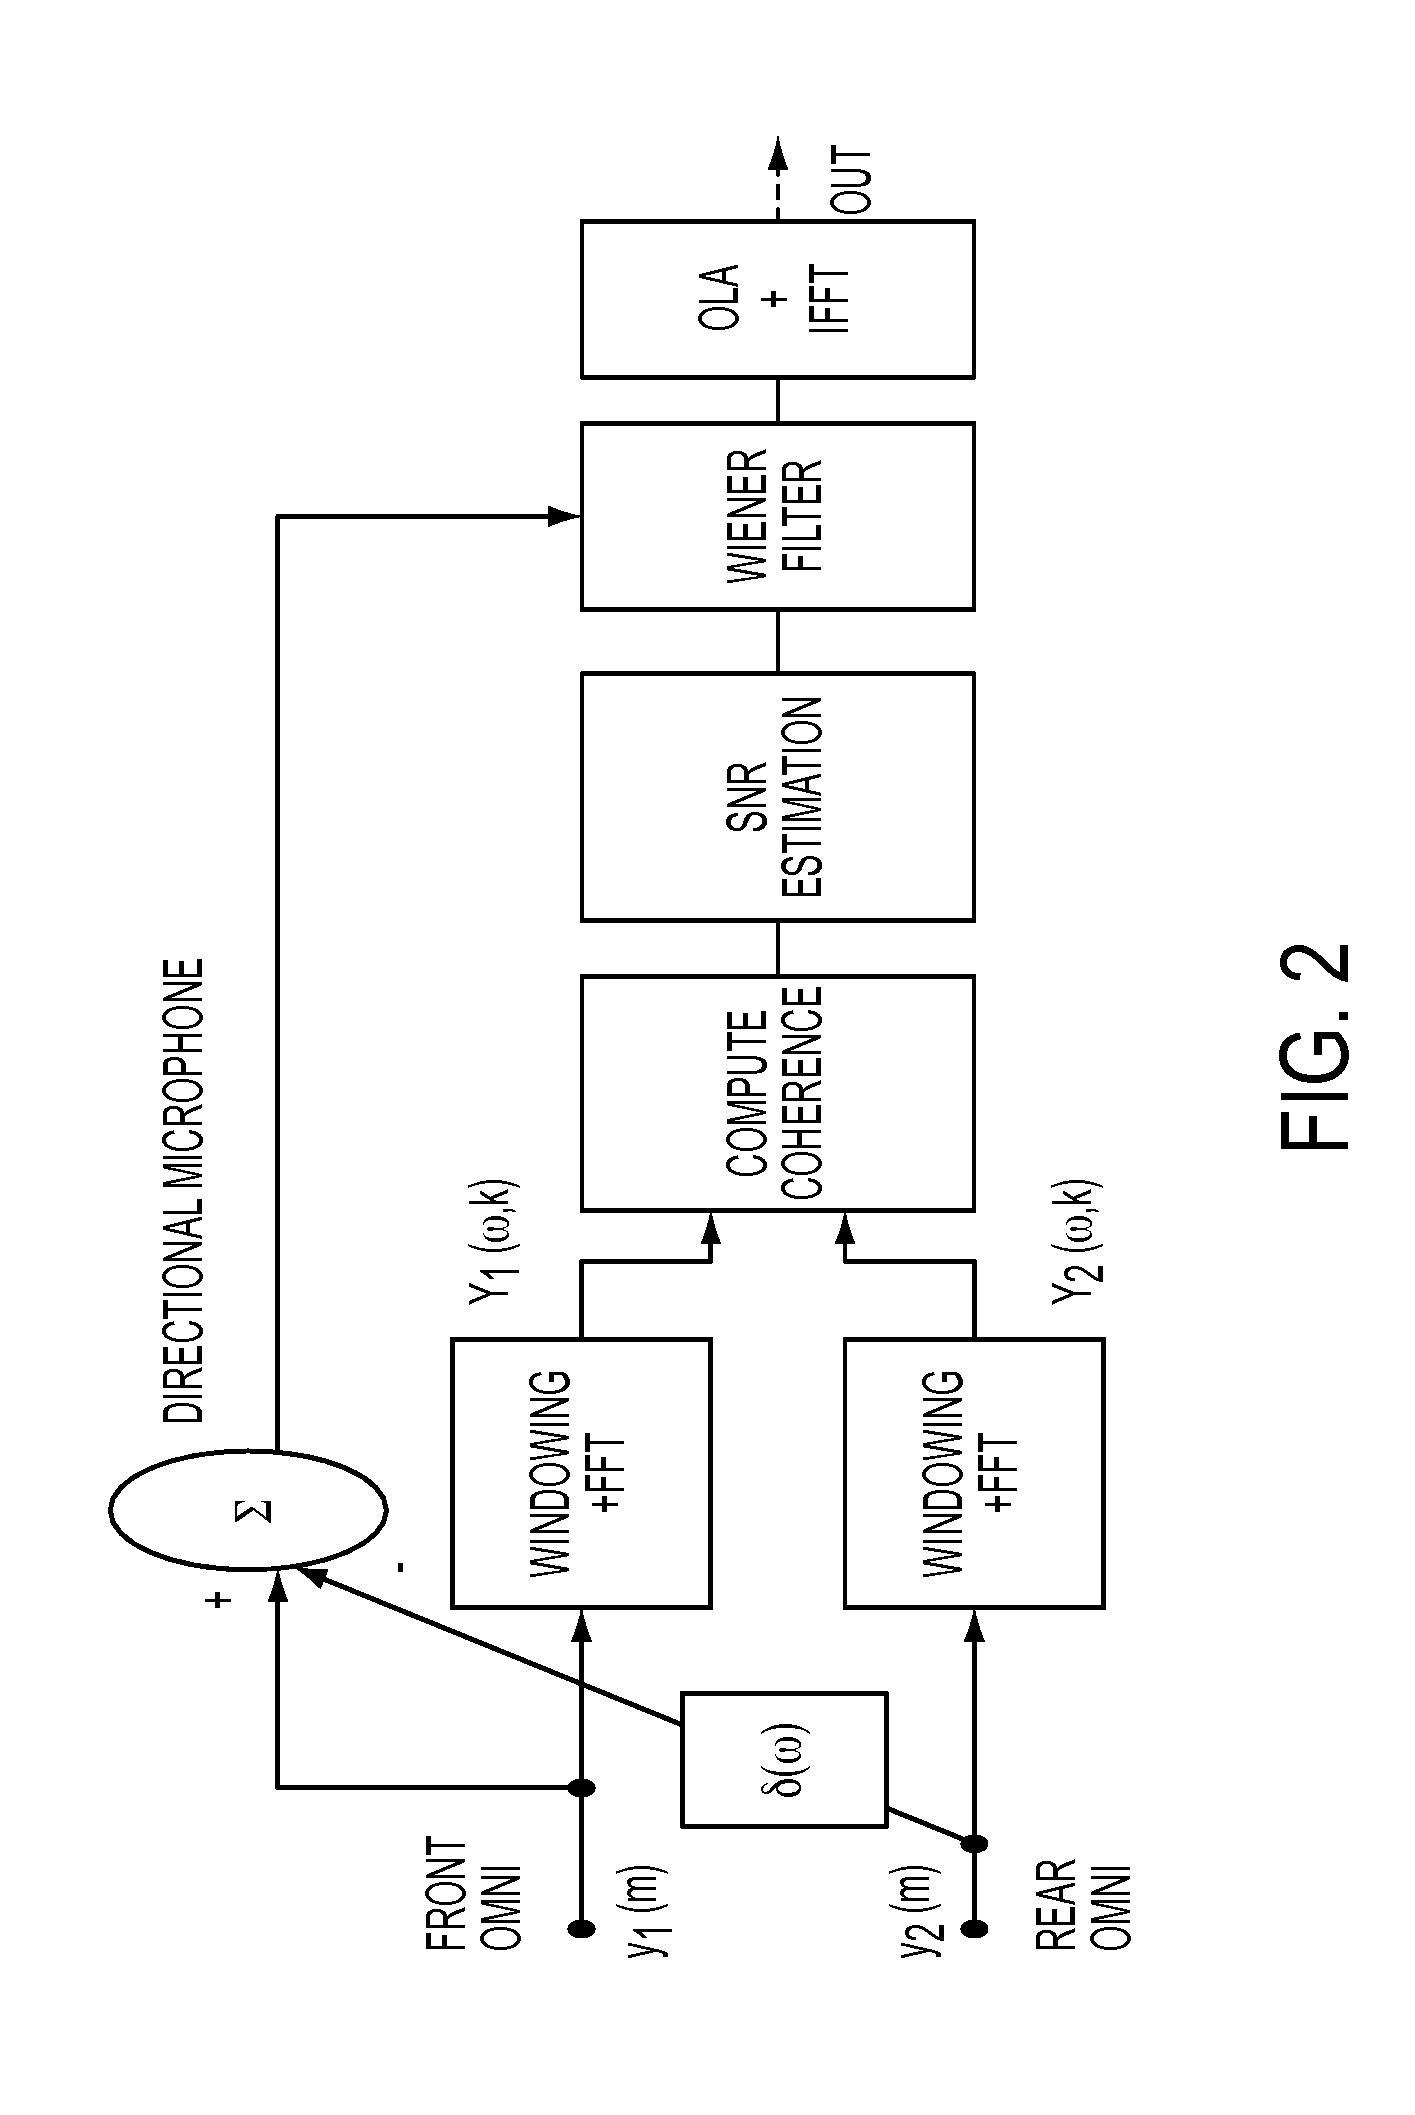 Method and system for enhancing the intelligibility of sounds relative to background noise